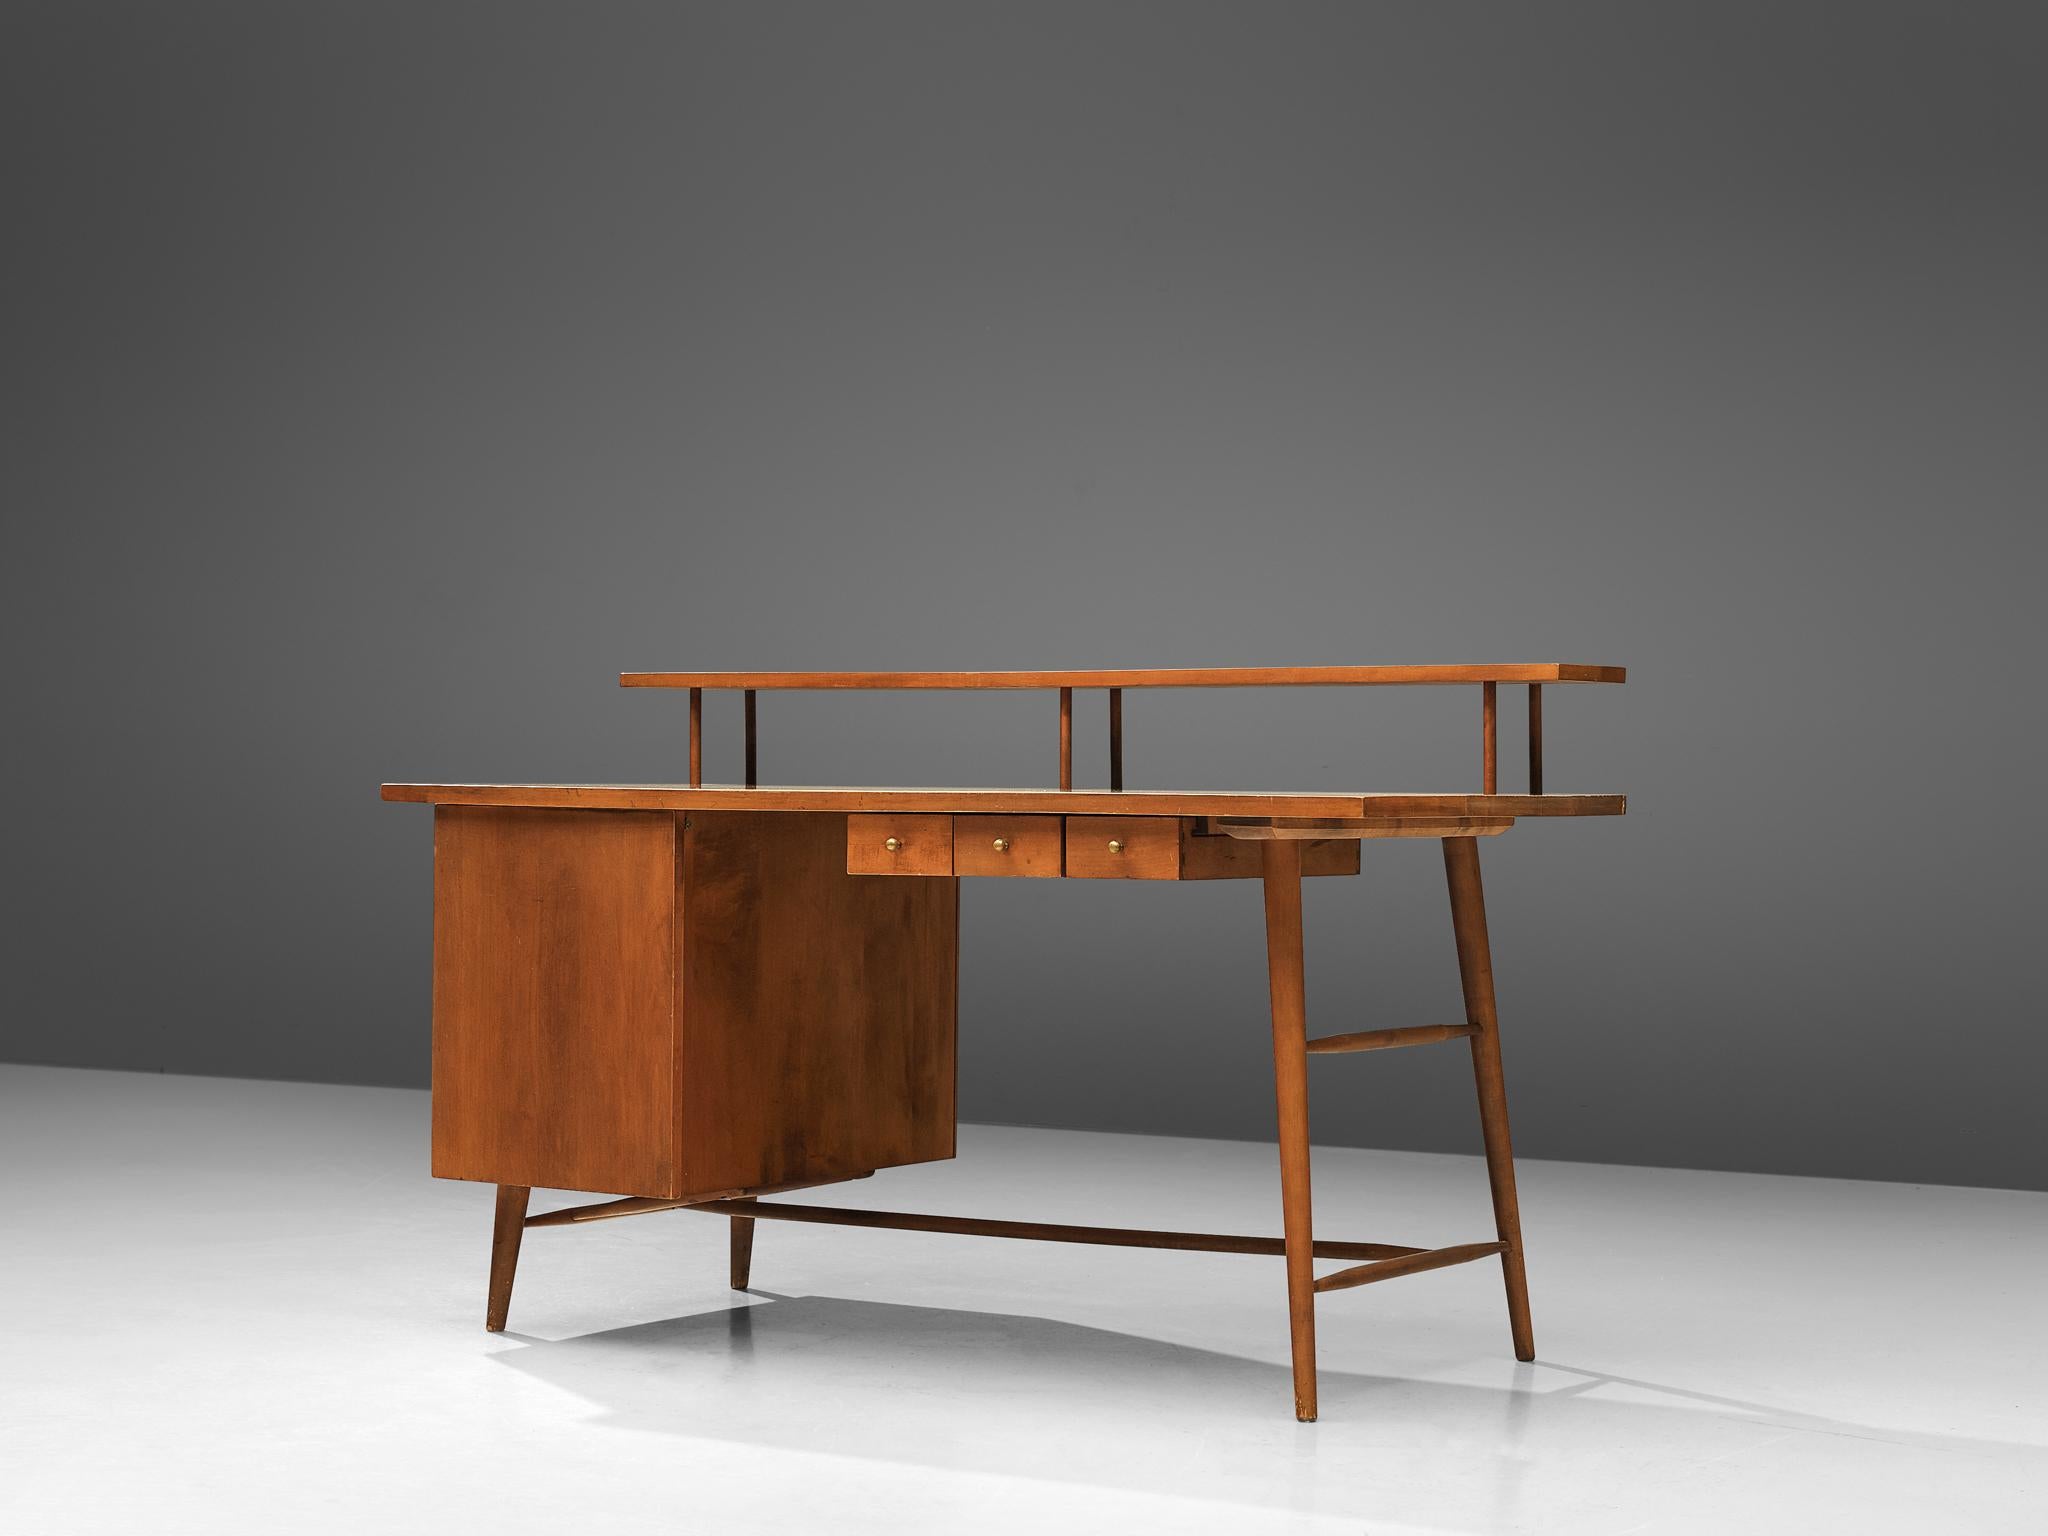 Paul McCobb for Winchendom Furniture Company, desk, maple, United States, 1950s

Elegant maple desk with one sided pedestal with a large storage compartment and three small drawers on the other side. The desk is executed with slender legs,